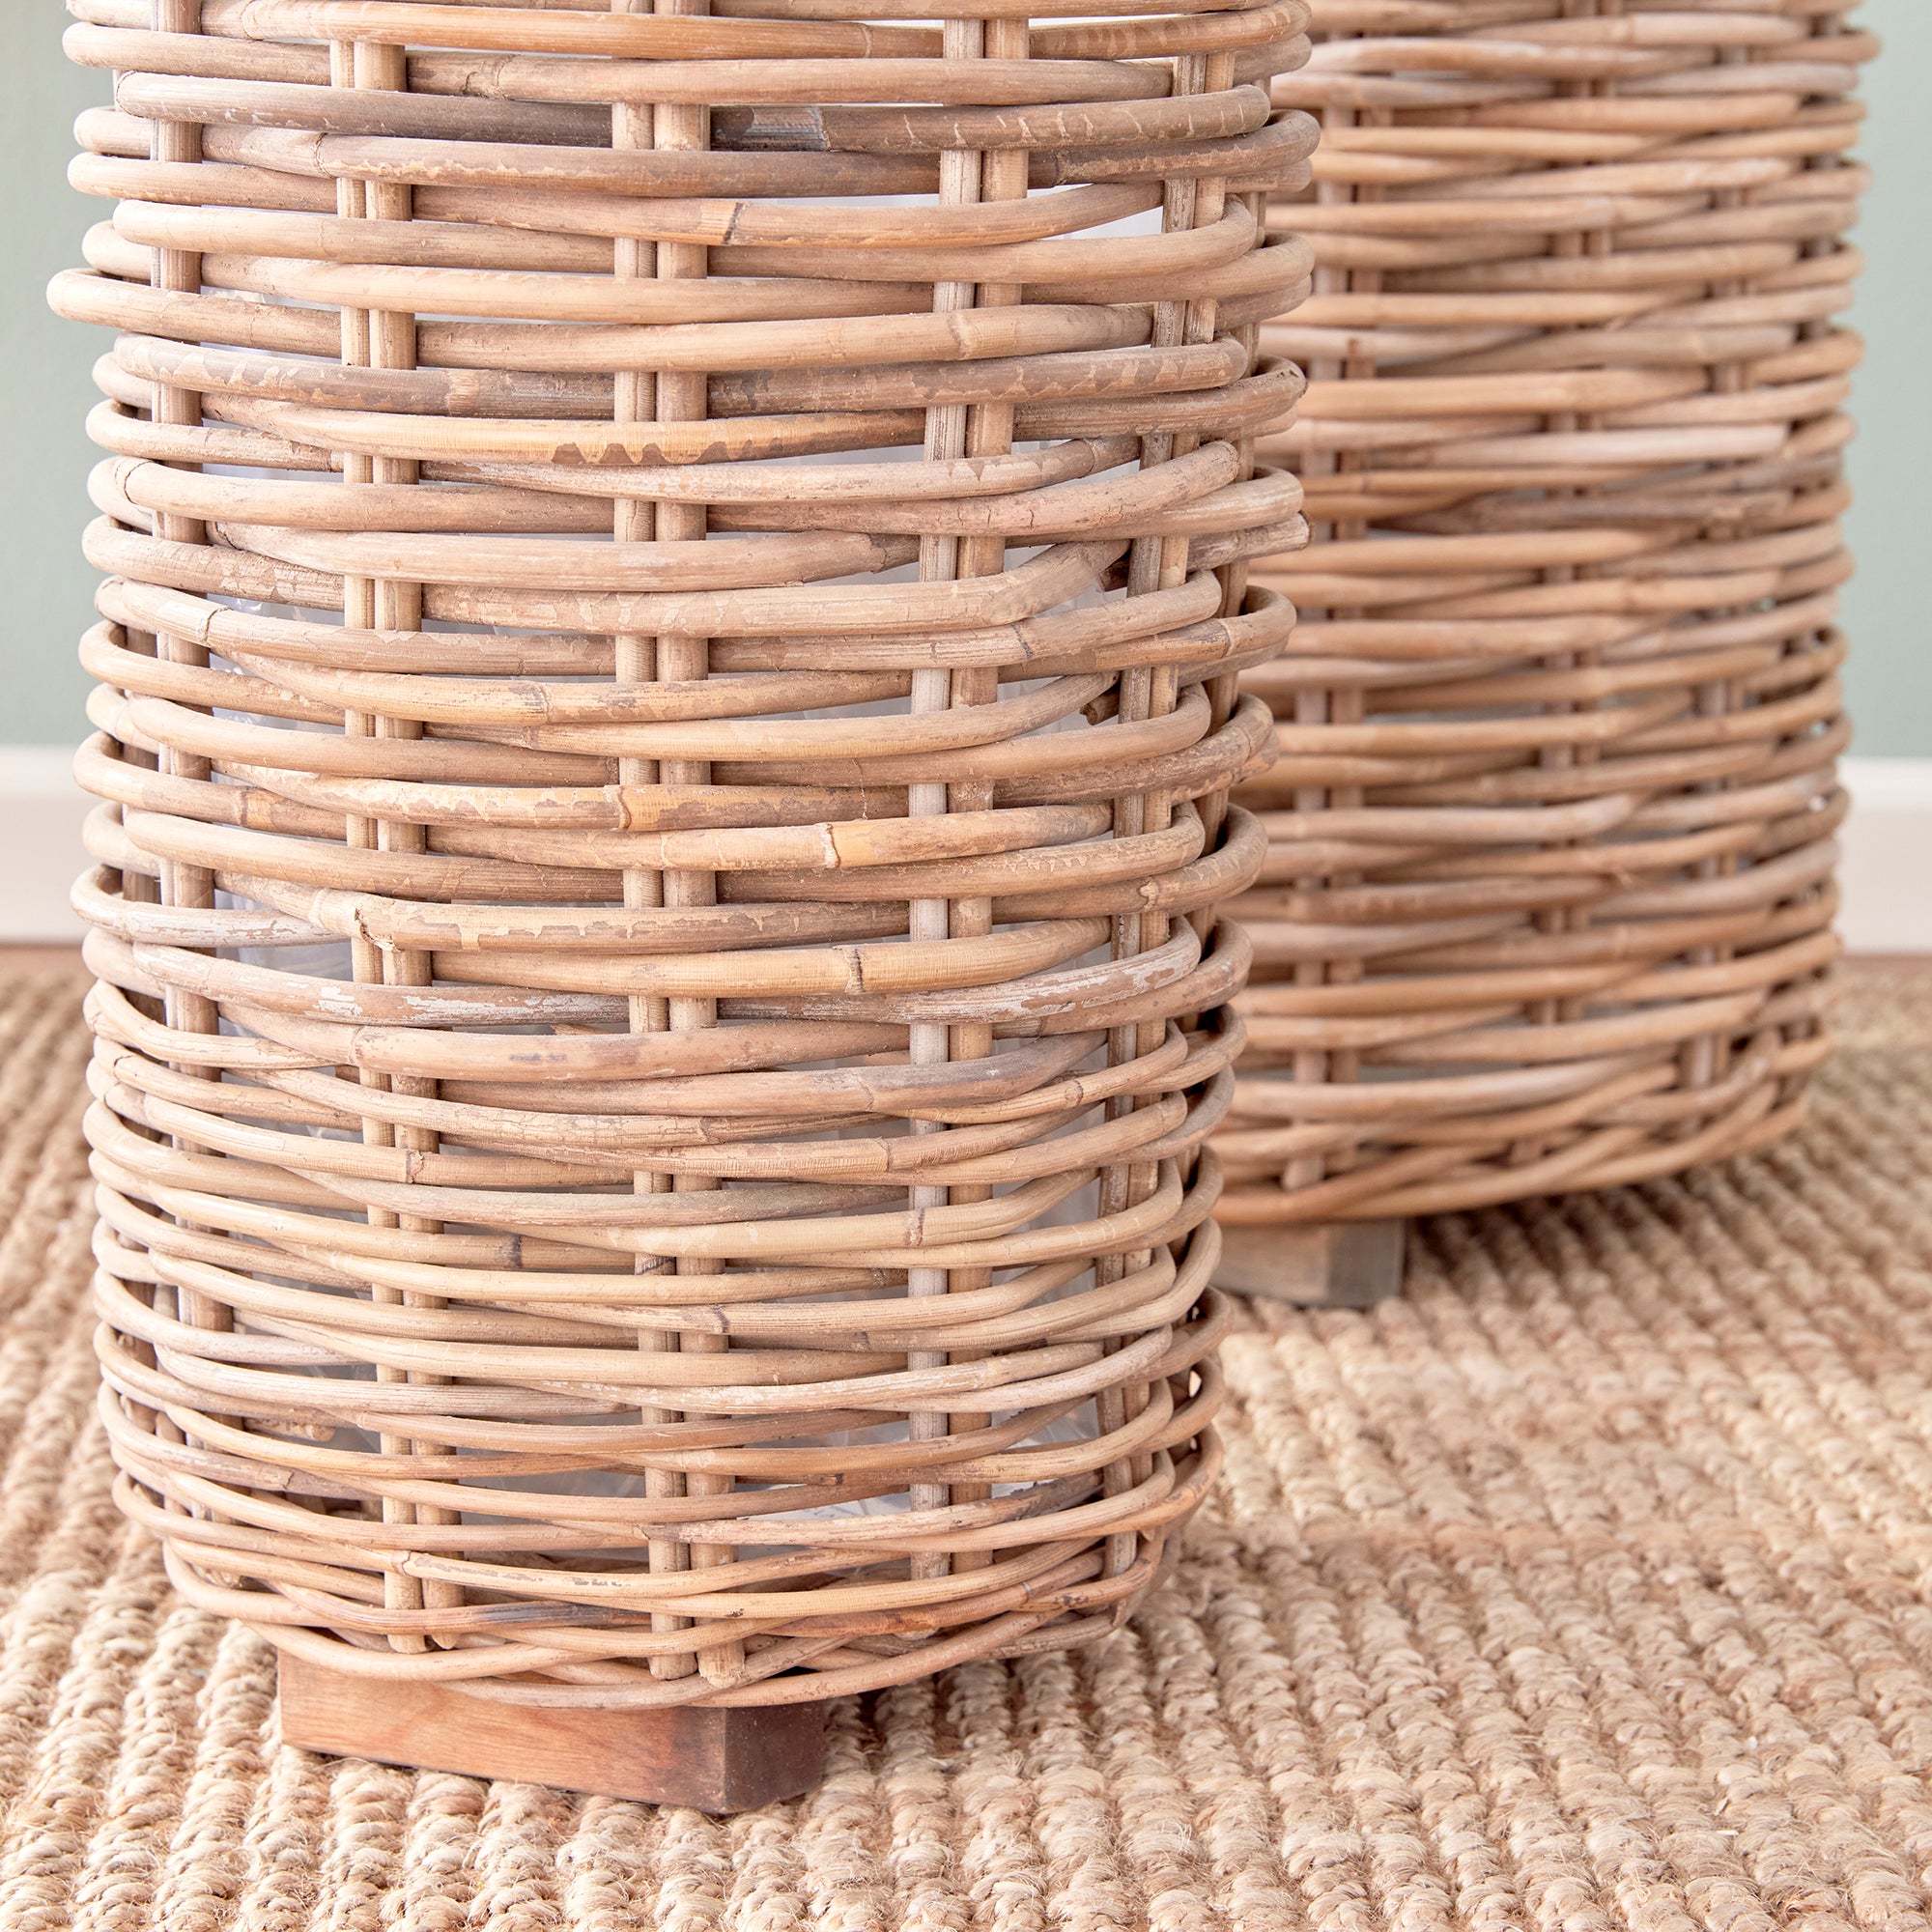 Made of a thick, woven rattan this set of two tall baskets are made to last. Furnished with a plastic liner to protect, and teak feet adding stability and elevating from the floor keeping them dry. Just as smart as they are beautiful. Amethyst Home provides interior design, new construction, custom furniture, and area rugs in the Boston metro area.